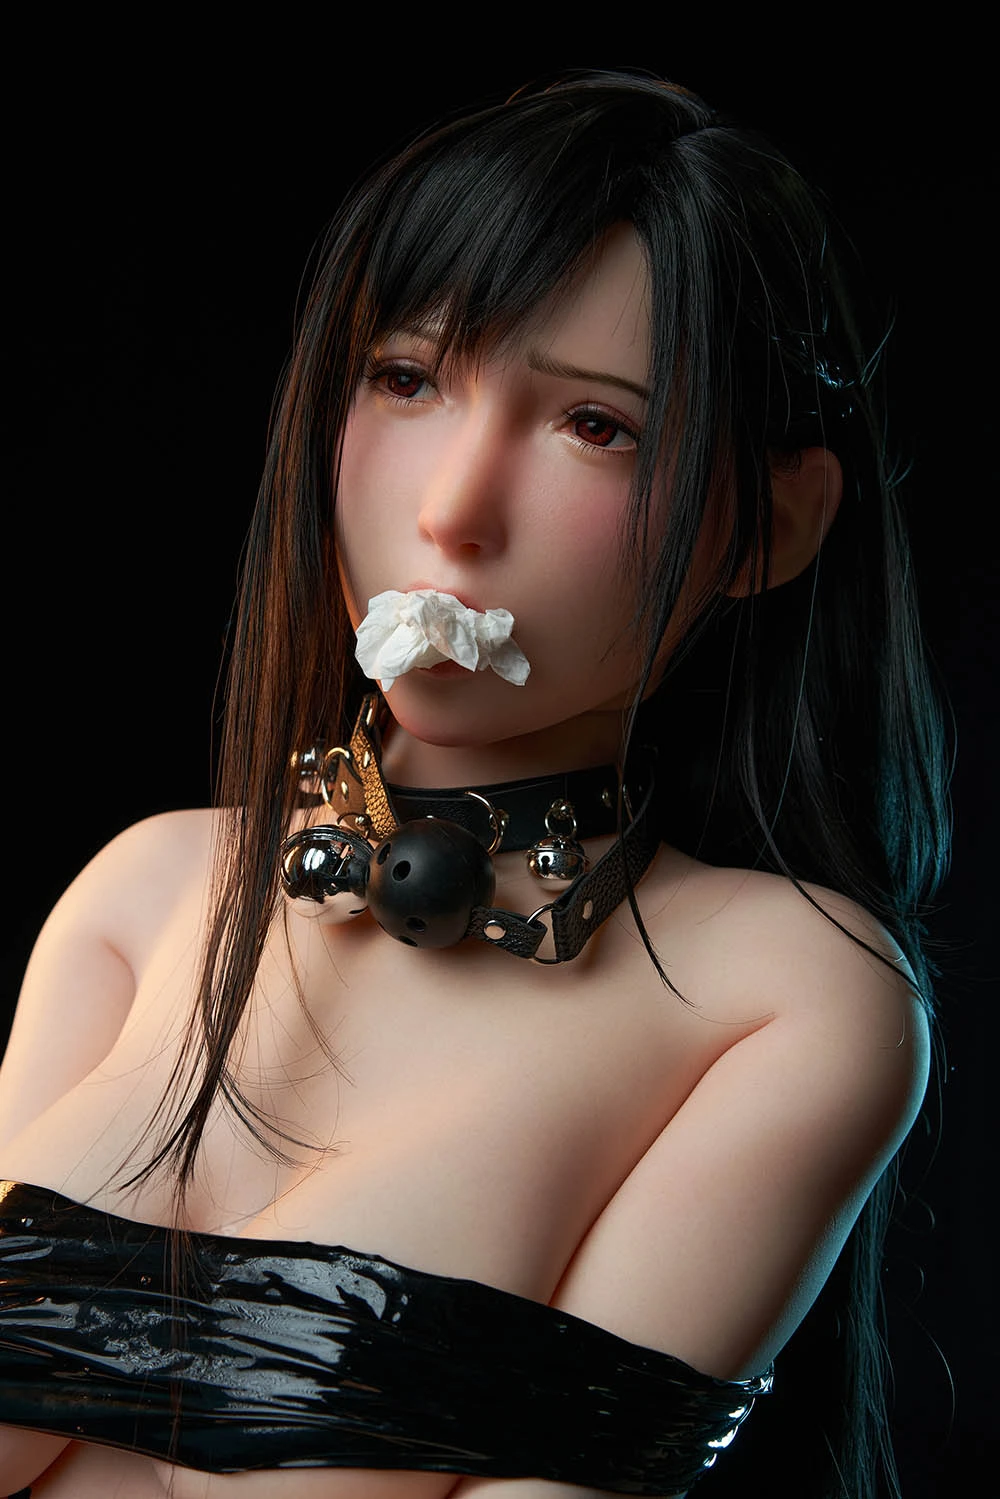  sexdoll mouth covered with tissue